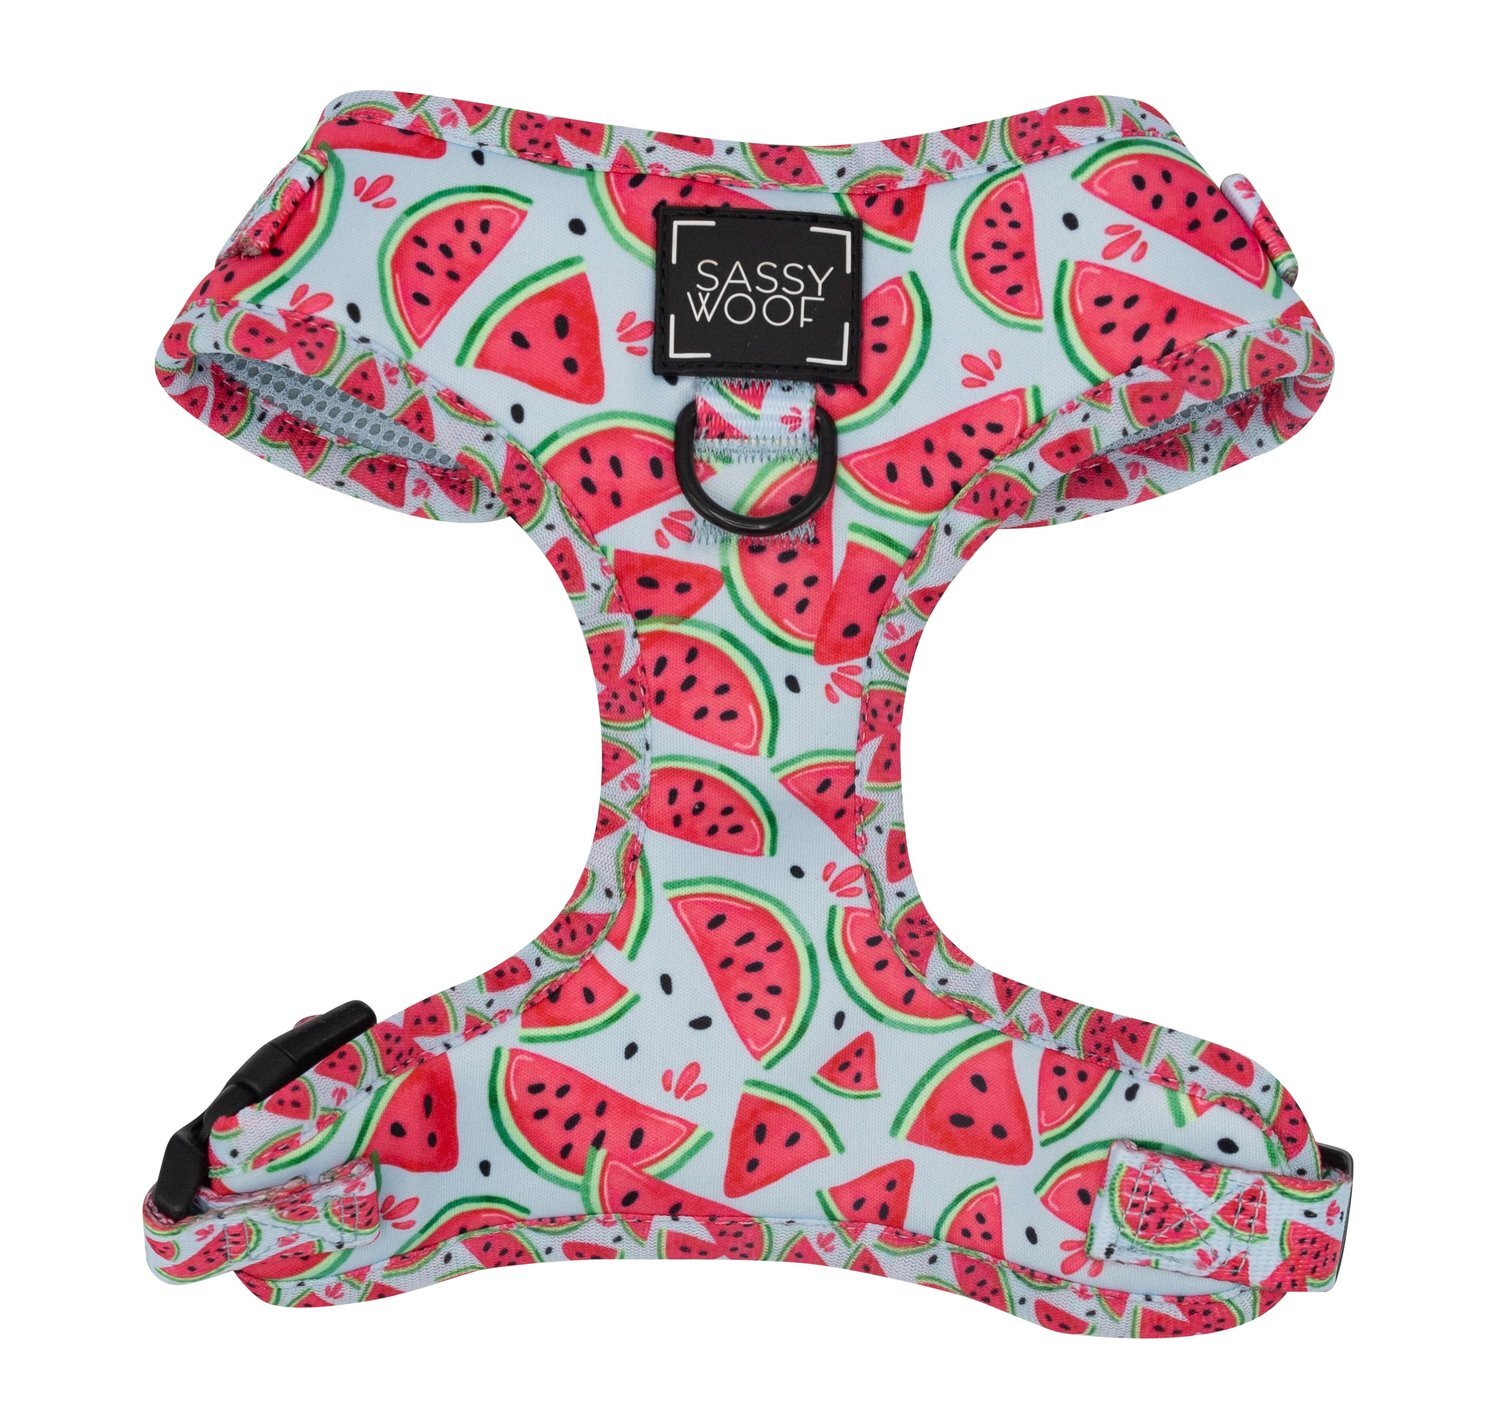 Sassy. Woof Dog Harness in The Dapple's Black Friday Sales Round Up for Dog Lovers Including Dog Treats, Dog Toys, and Dog Beds on Sale